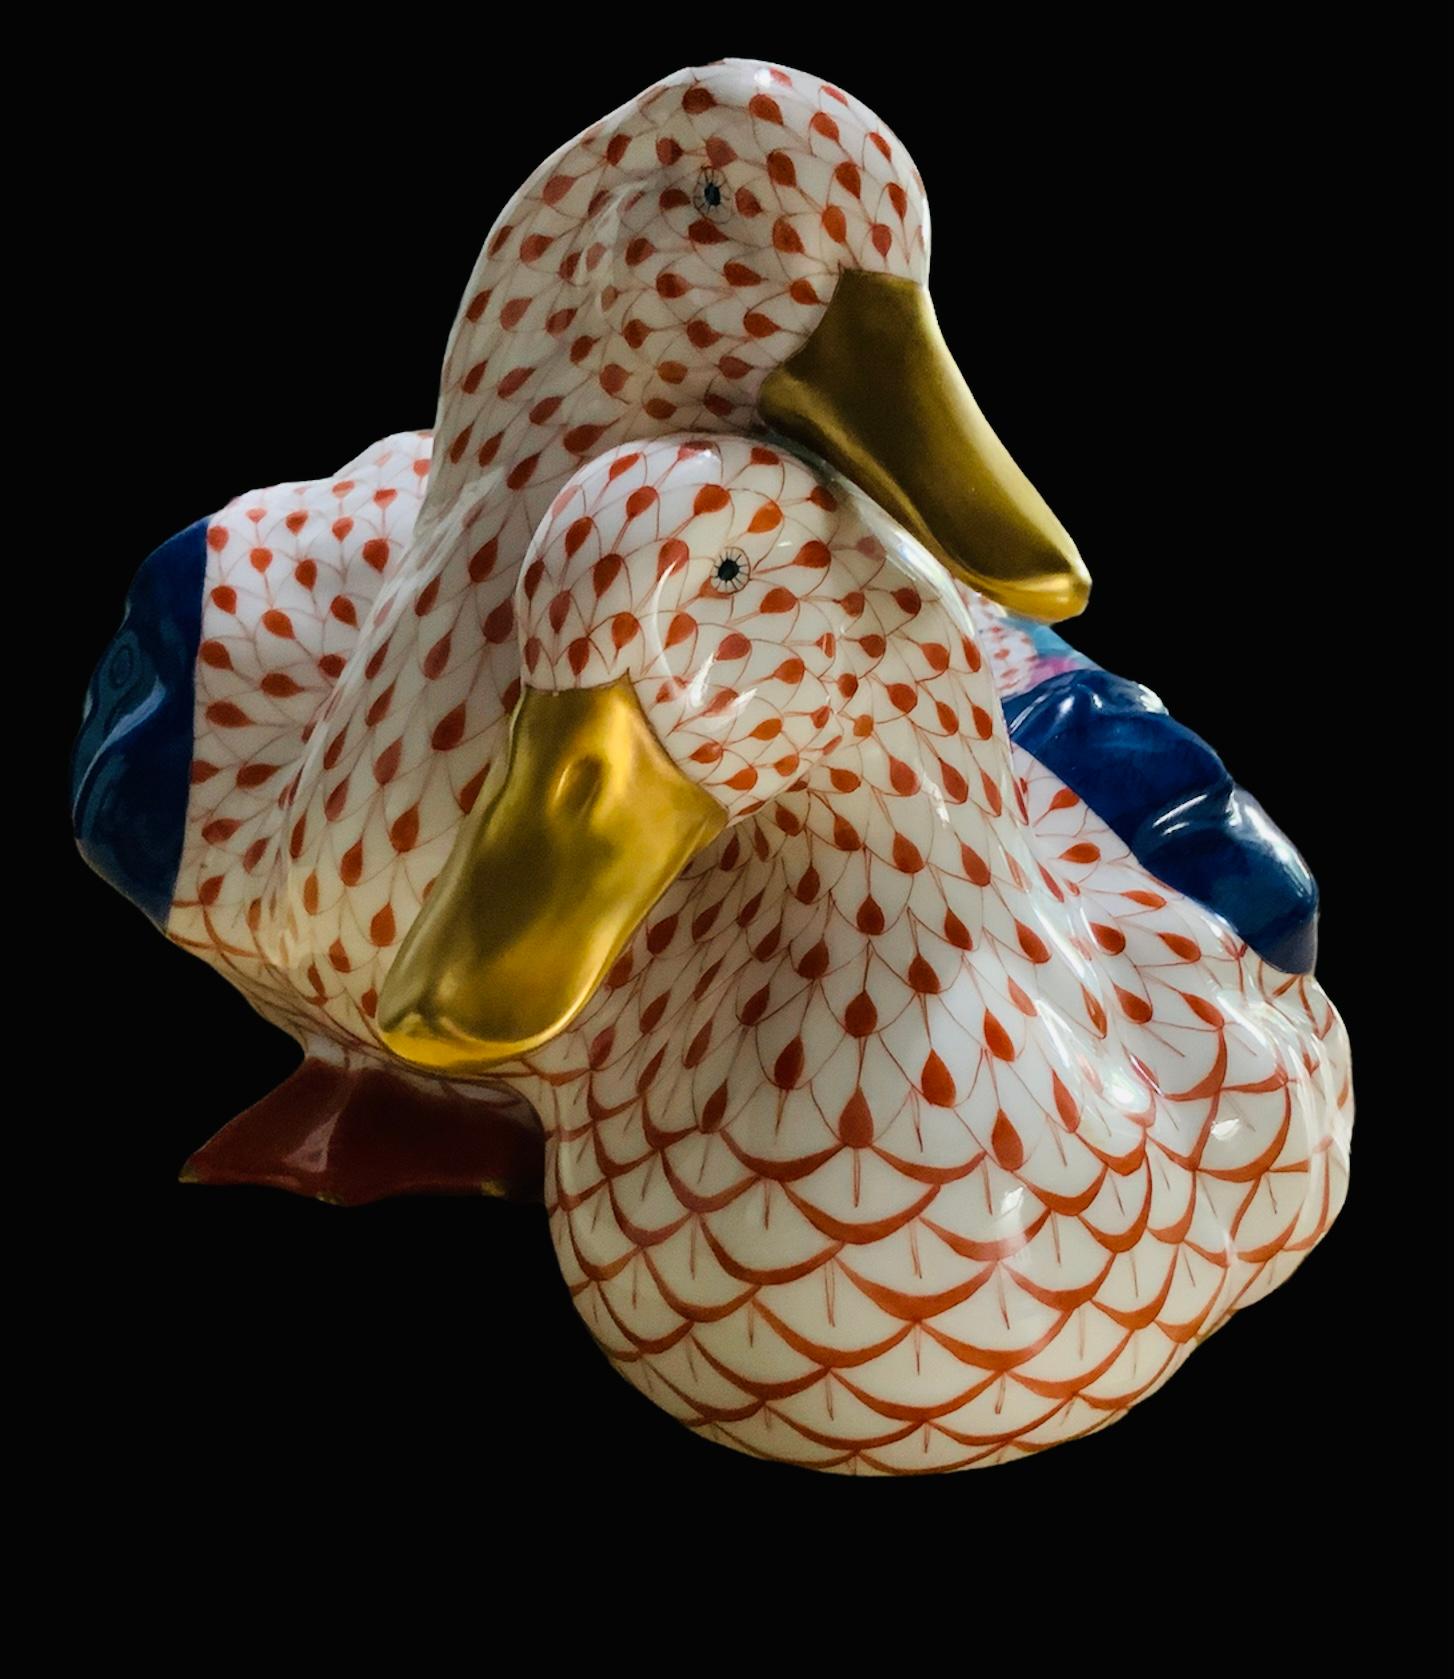 This is a pair of Herend porcelain hand painted medium size ducks. Their background is white with orange fish scale net pattern. Their wings are hand painted navy blue, pink, and turquoise color. Their tail feathers are orange, gold, turquoise, and